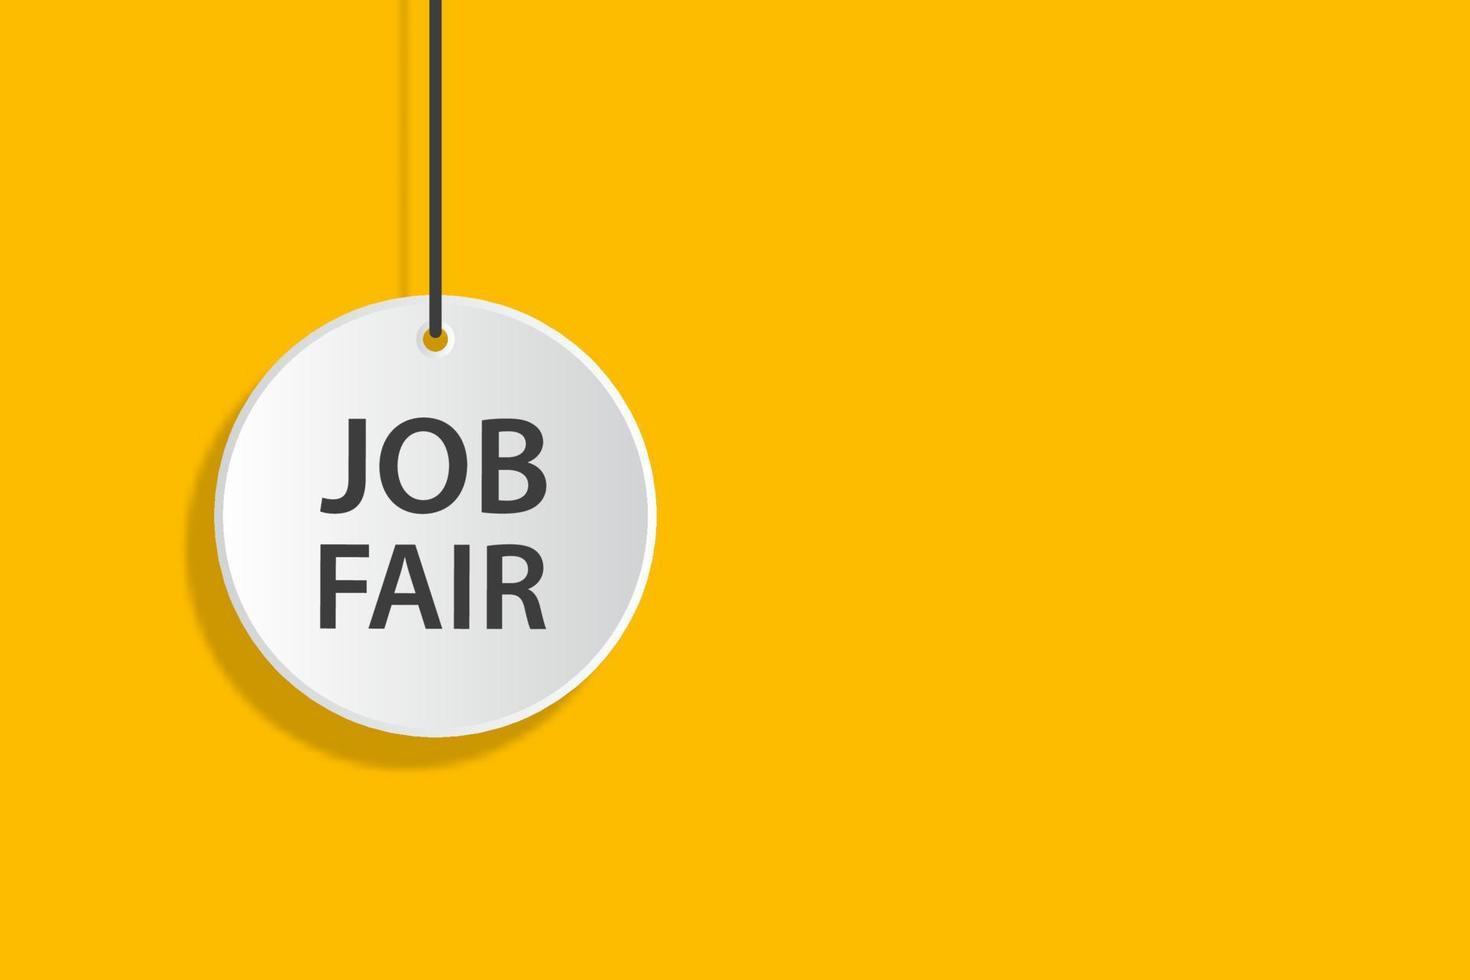 Job fair hanging sign vector human resource management concept for flyers, banners, presentations and posters.